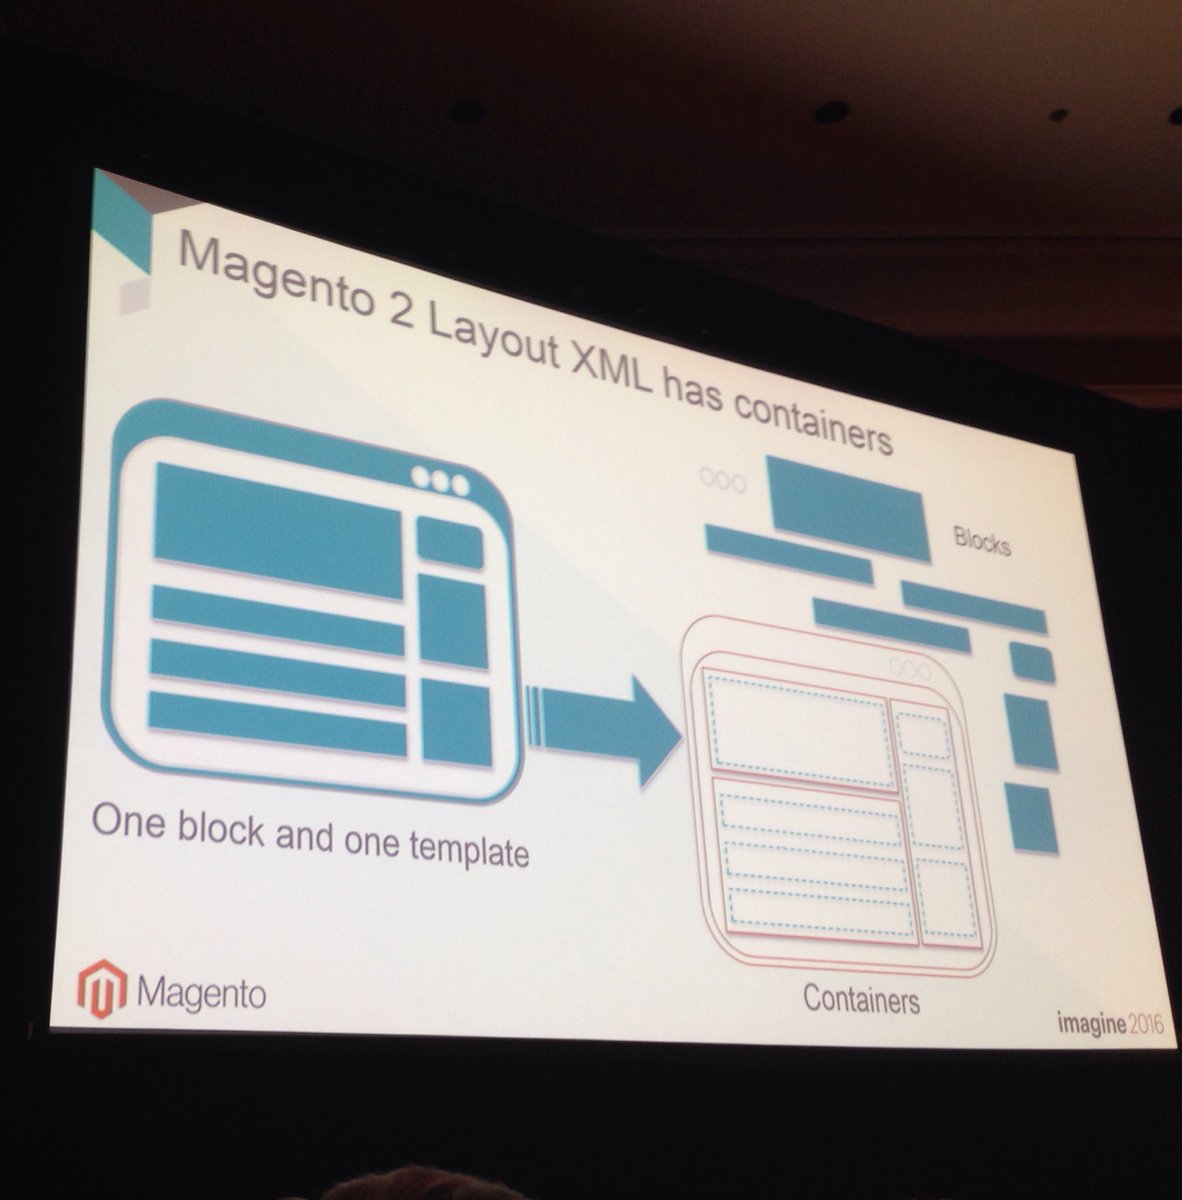 SheroDesigns: #Magento2 layout #XML has containers #blocks #MagentoImagine @magento #frontend #dev https://t.co/CMmEV6Mv9y